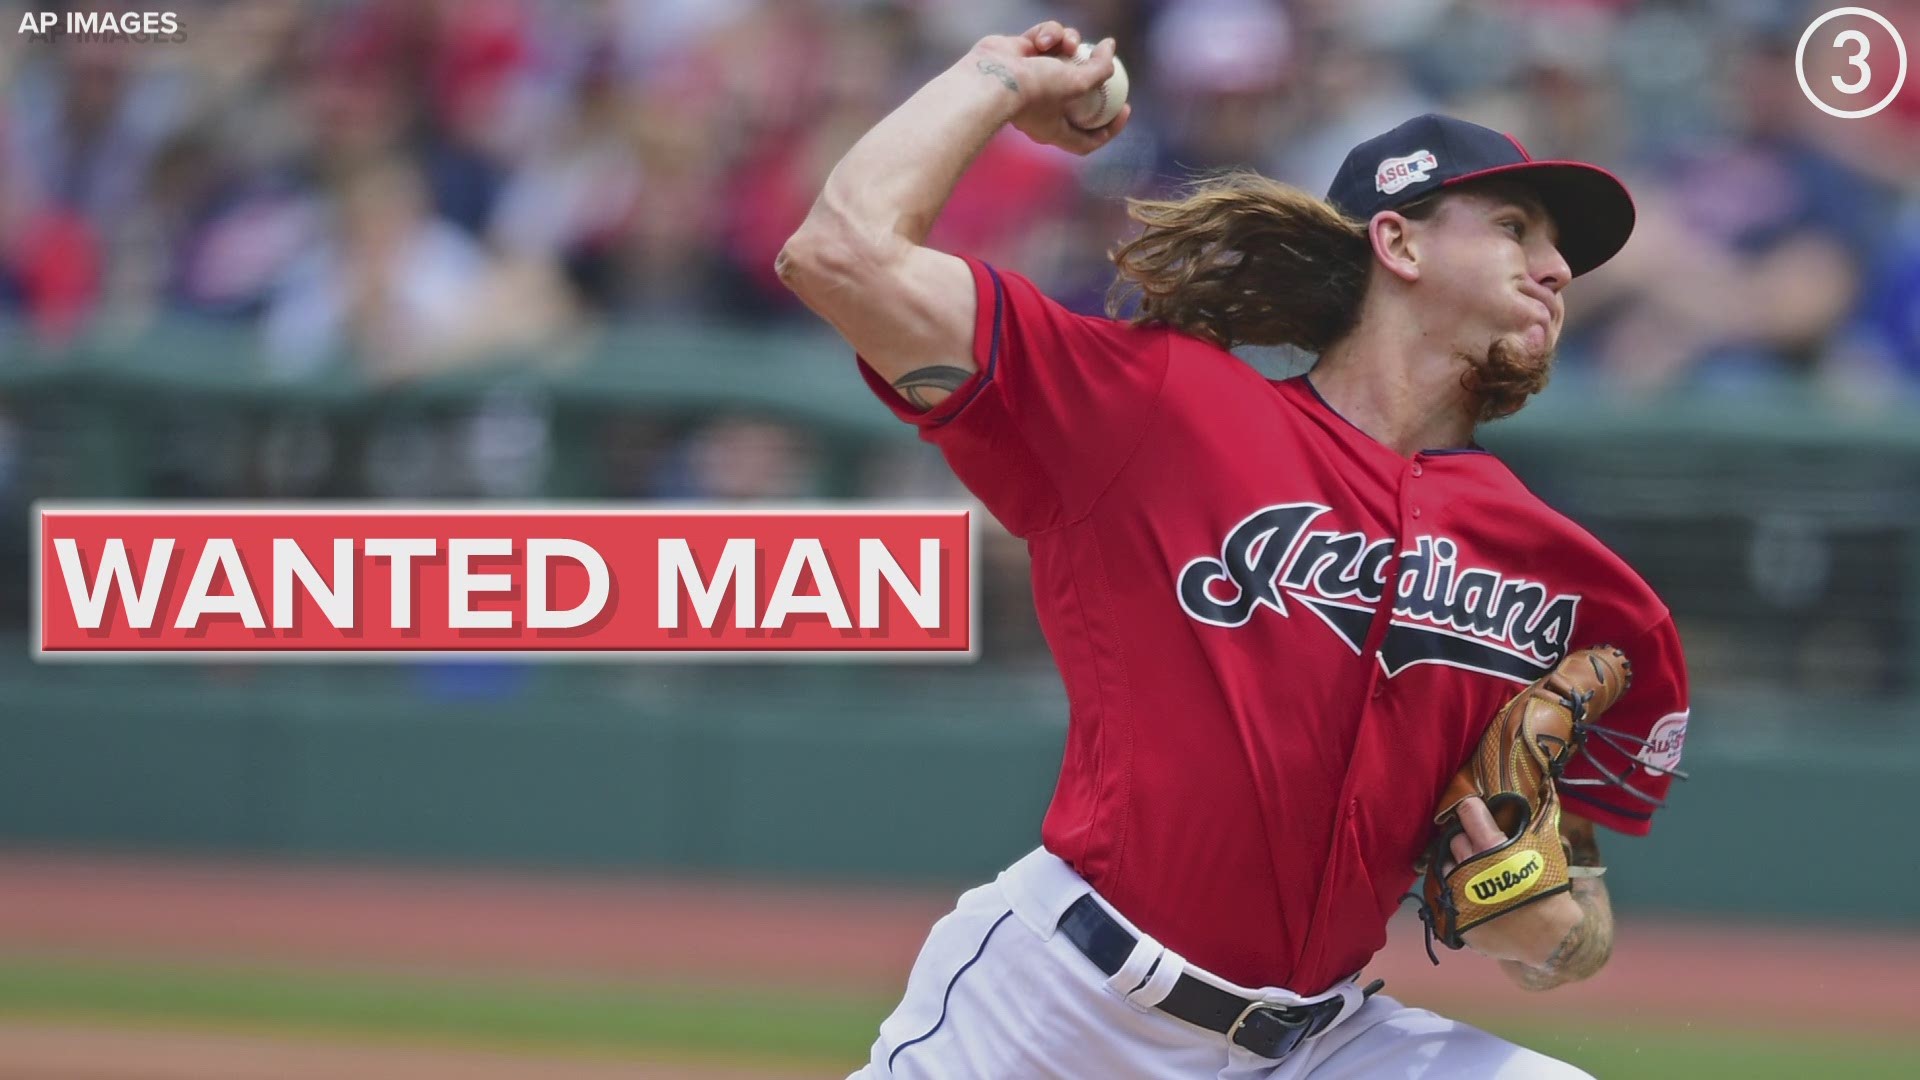 Wanted man!  According to Jon Paul Morosi of MLB.com, the Los Angeles Angels have targeted Cleveland Indians pitcher Mike Clevinger for a potential trade.